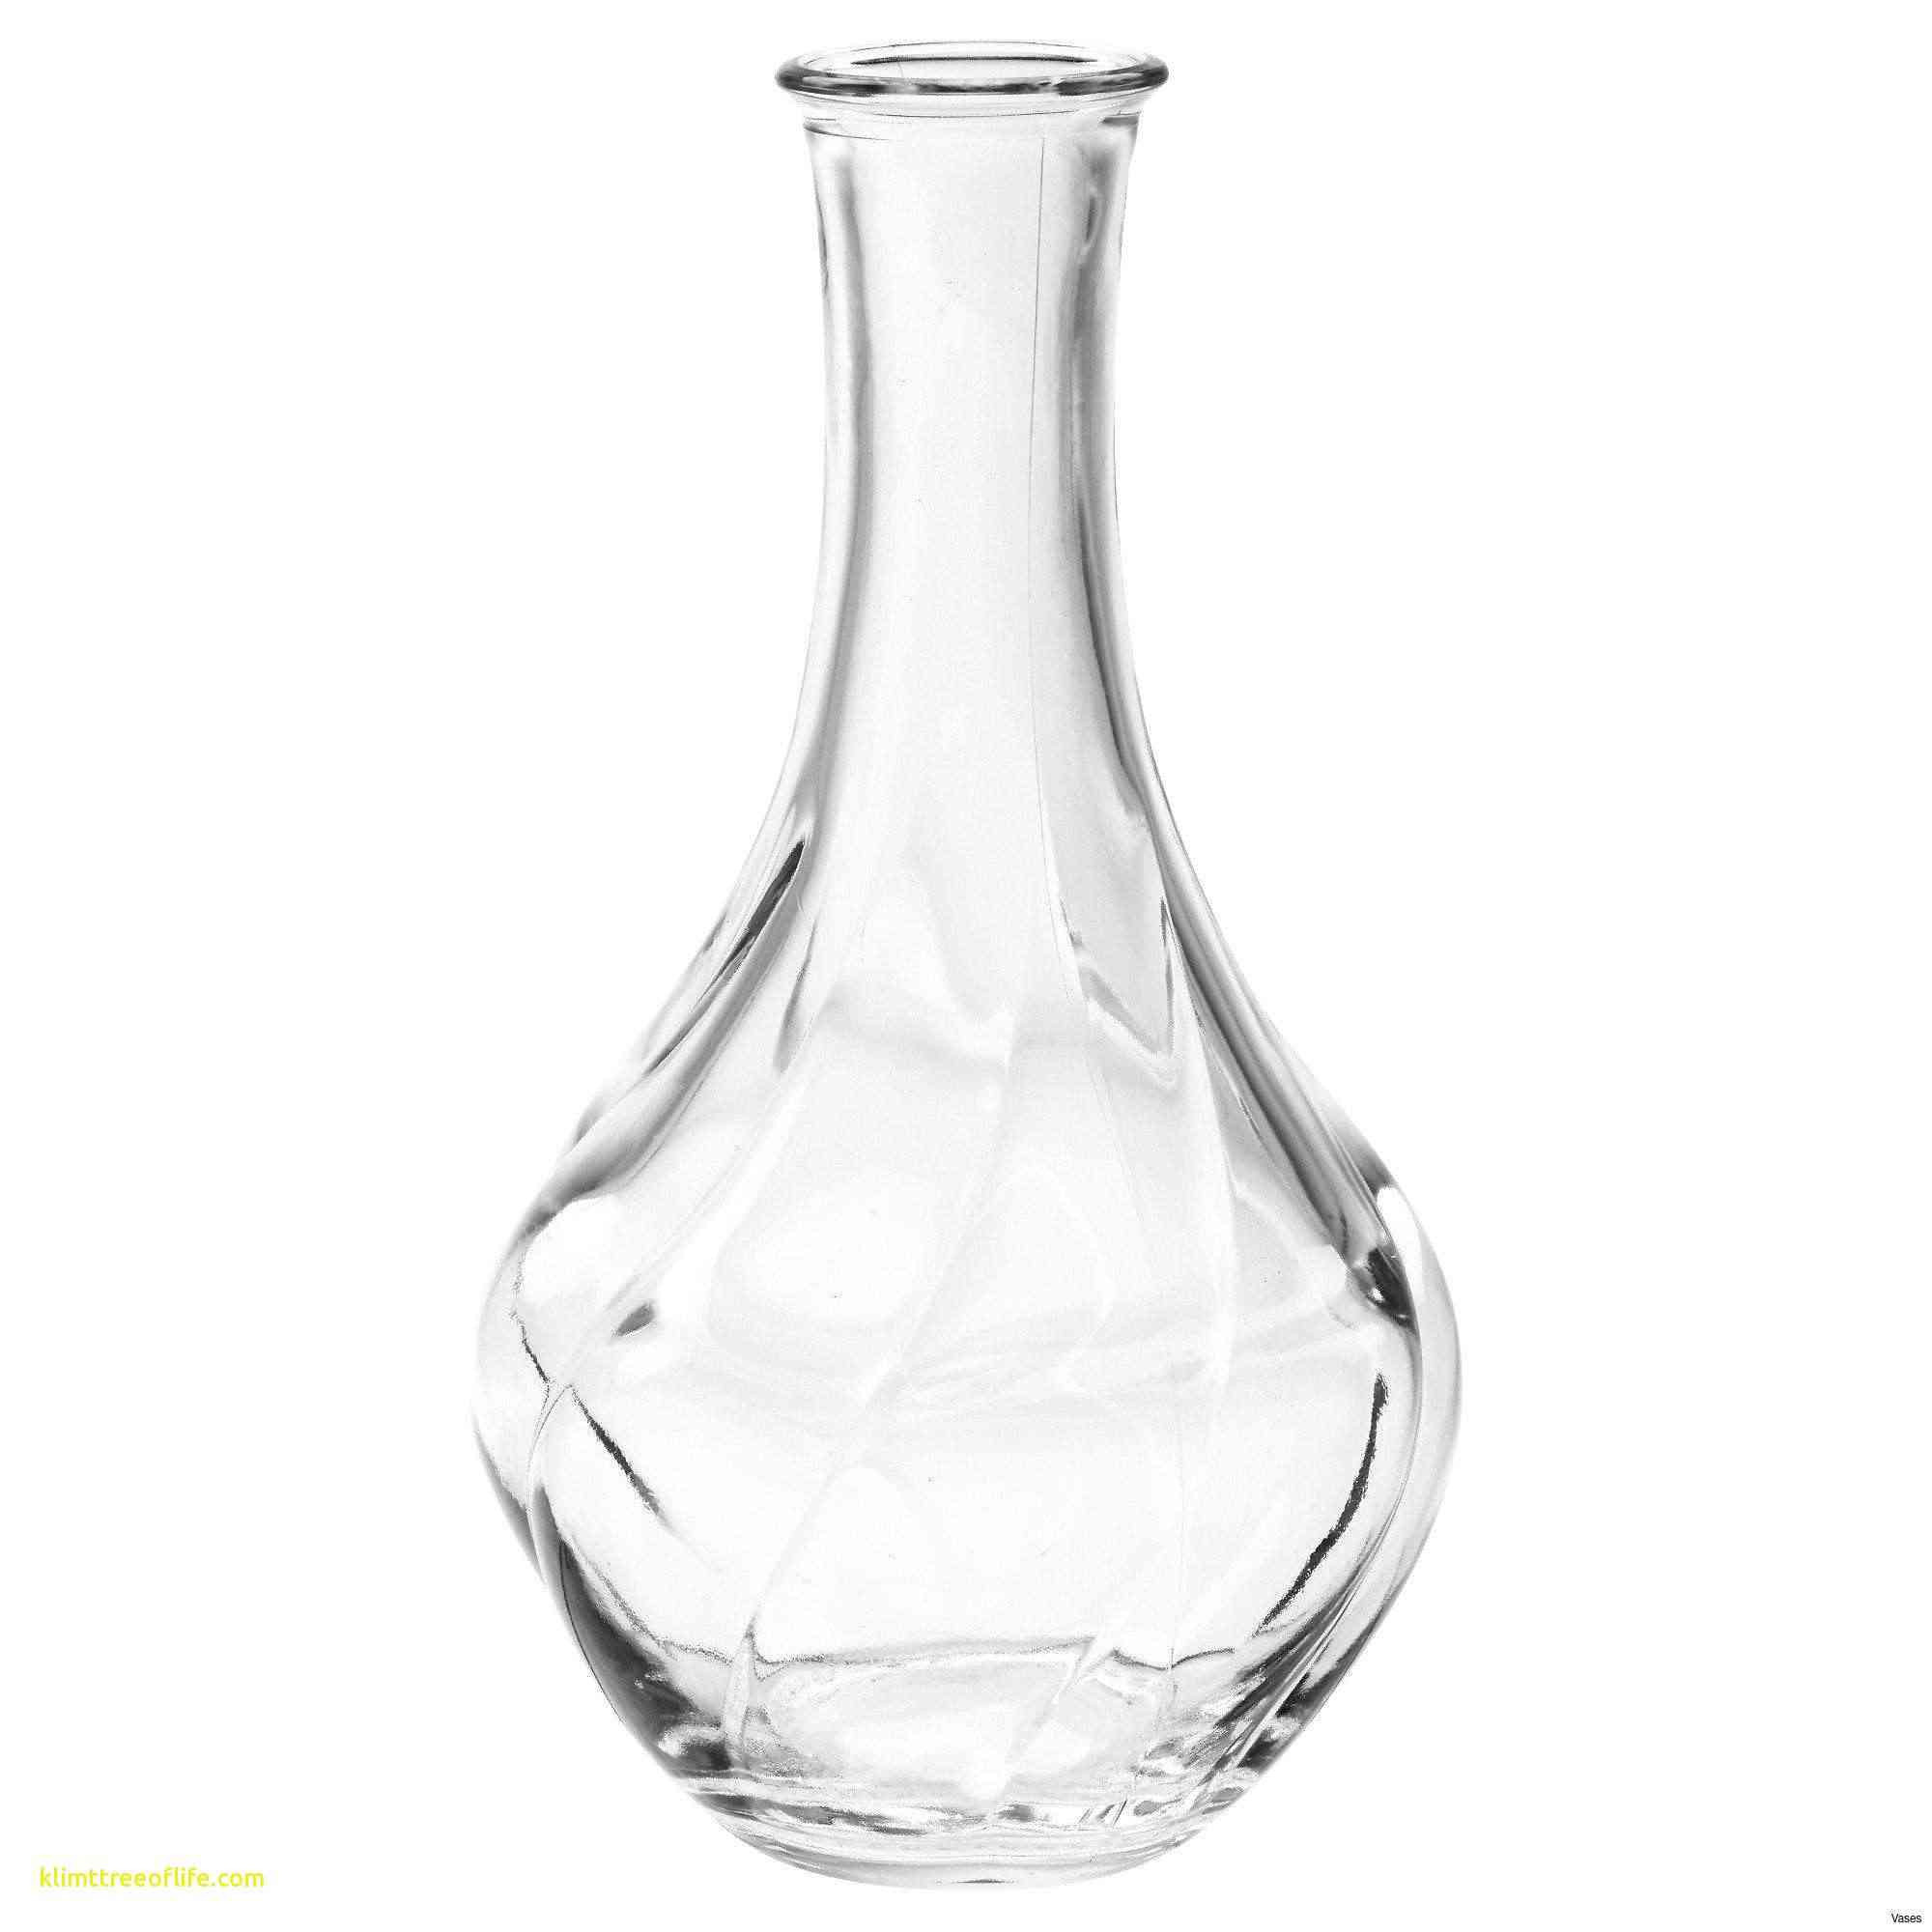 14 Awesome Recycled Glass Balloon Vase 2024 free download recycled glass balloon vase of wide glass vase stock recycled glass balloon vases classically clear pertaining to wide glass vase images paint a picture luxury h vases paint vase i 0d with g